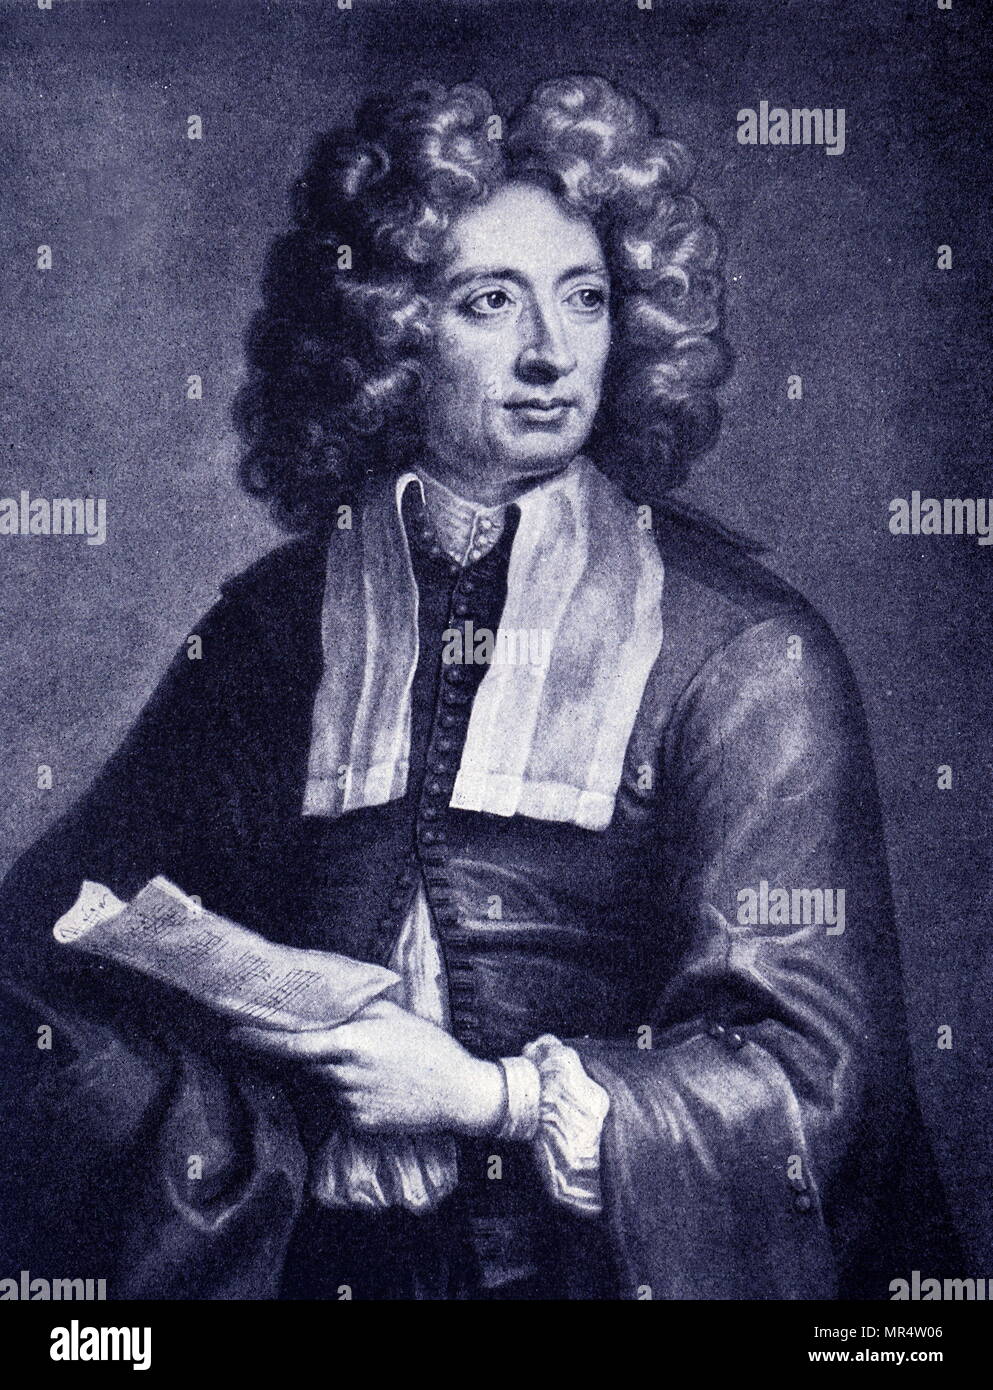 Portrait of Arcangelo Corelli (1653-1713) an Italian violinist and composer of the Baroque era. Dated 18th century Stock Photo